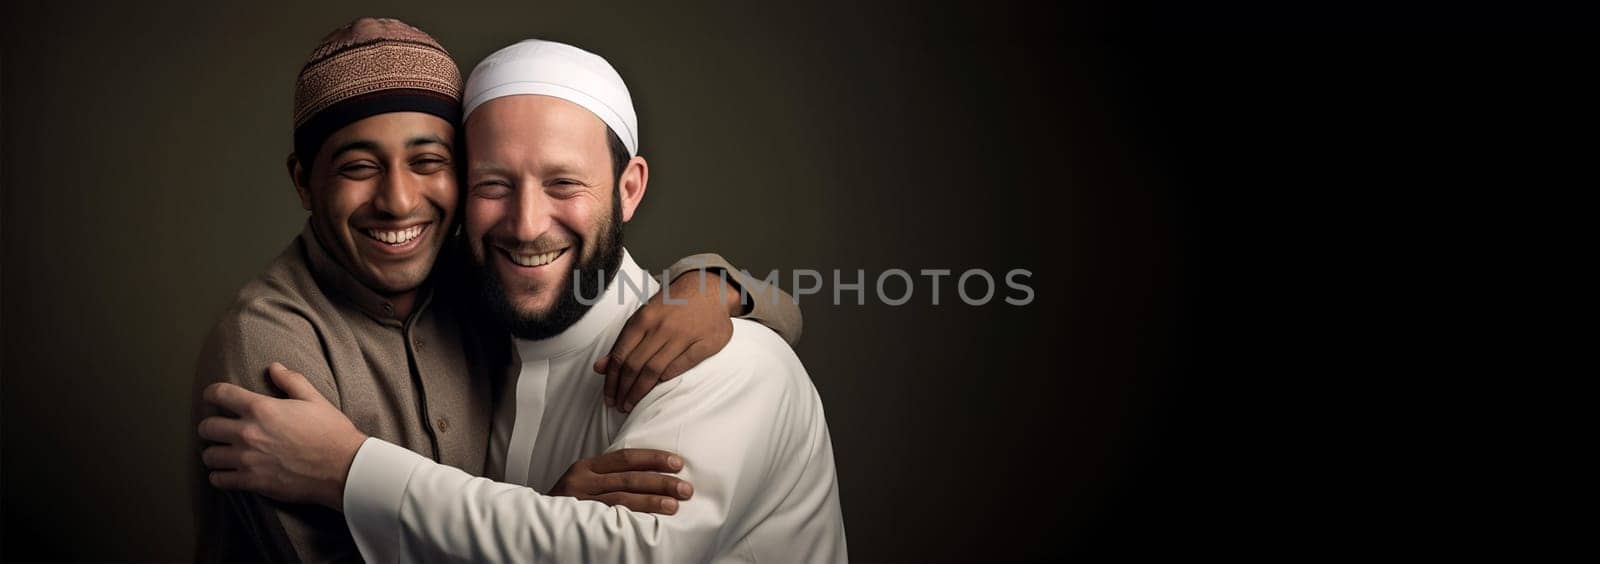 Two muslim man hugging and smiling. Eid mubarak concept. Islam friends or business parnerts embracing each other. Arabic men having warm meeting by Annebel146